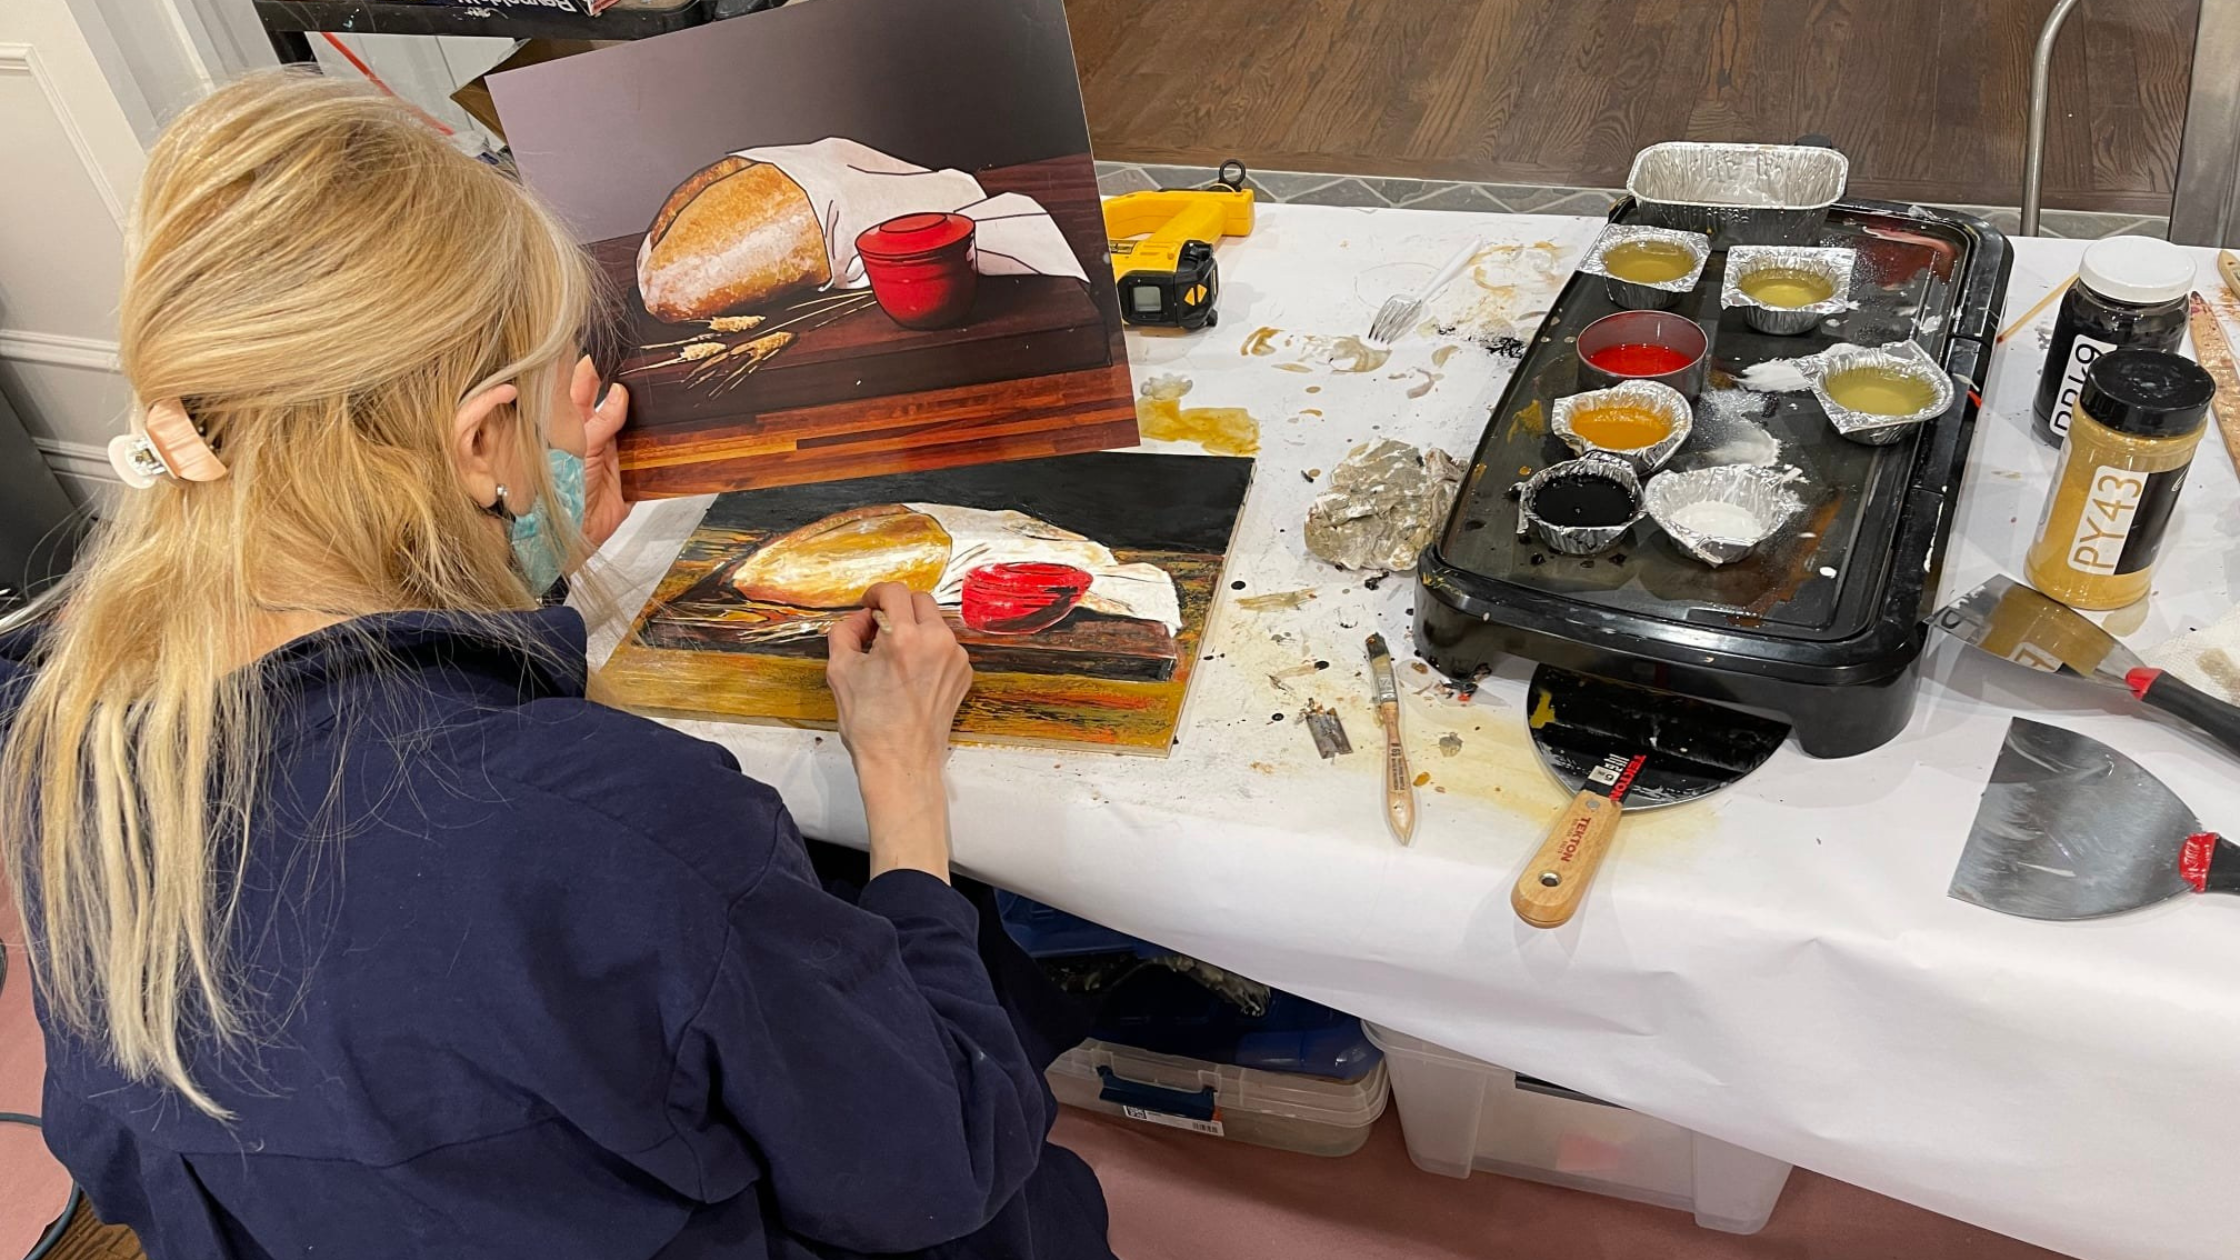 Oil Painting Classes